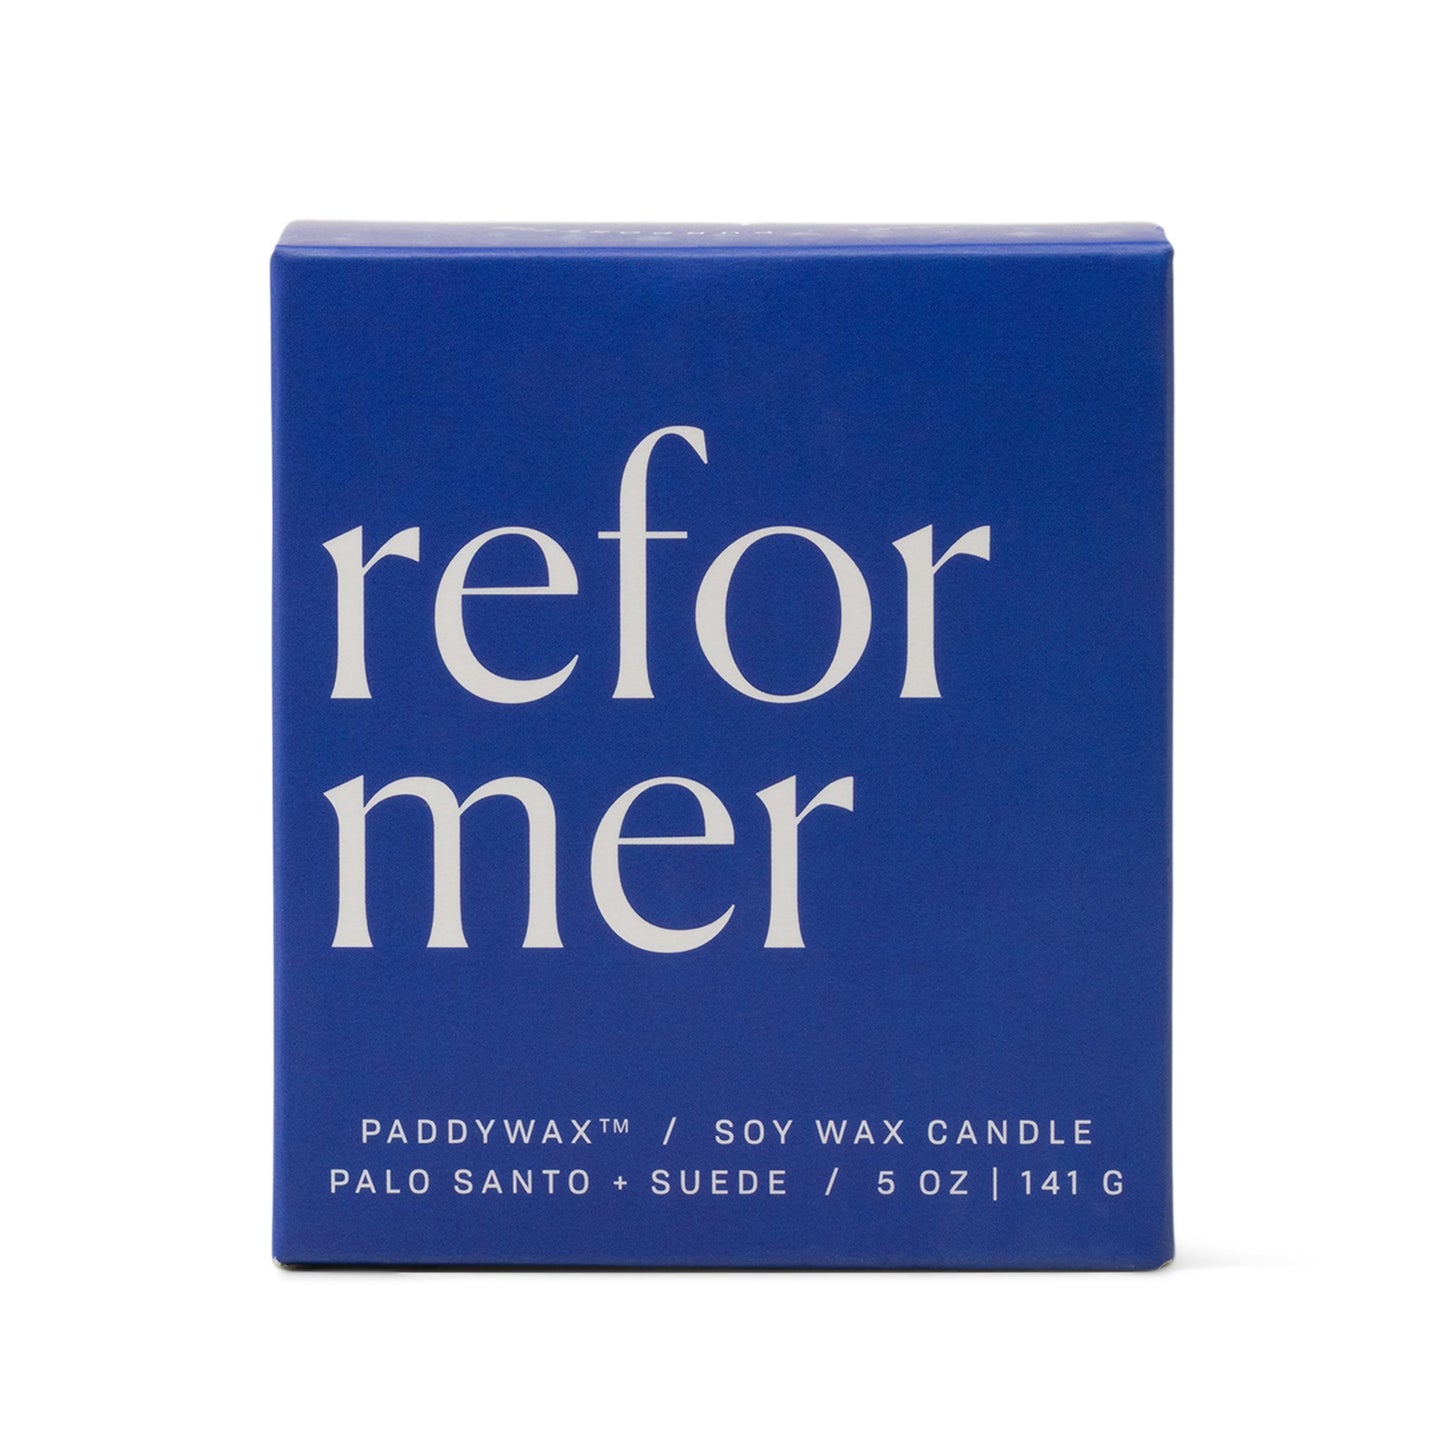 blue box that reads "reformer", the name of the enneagram 1